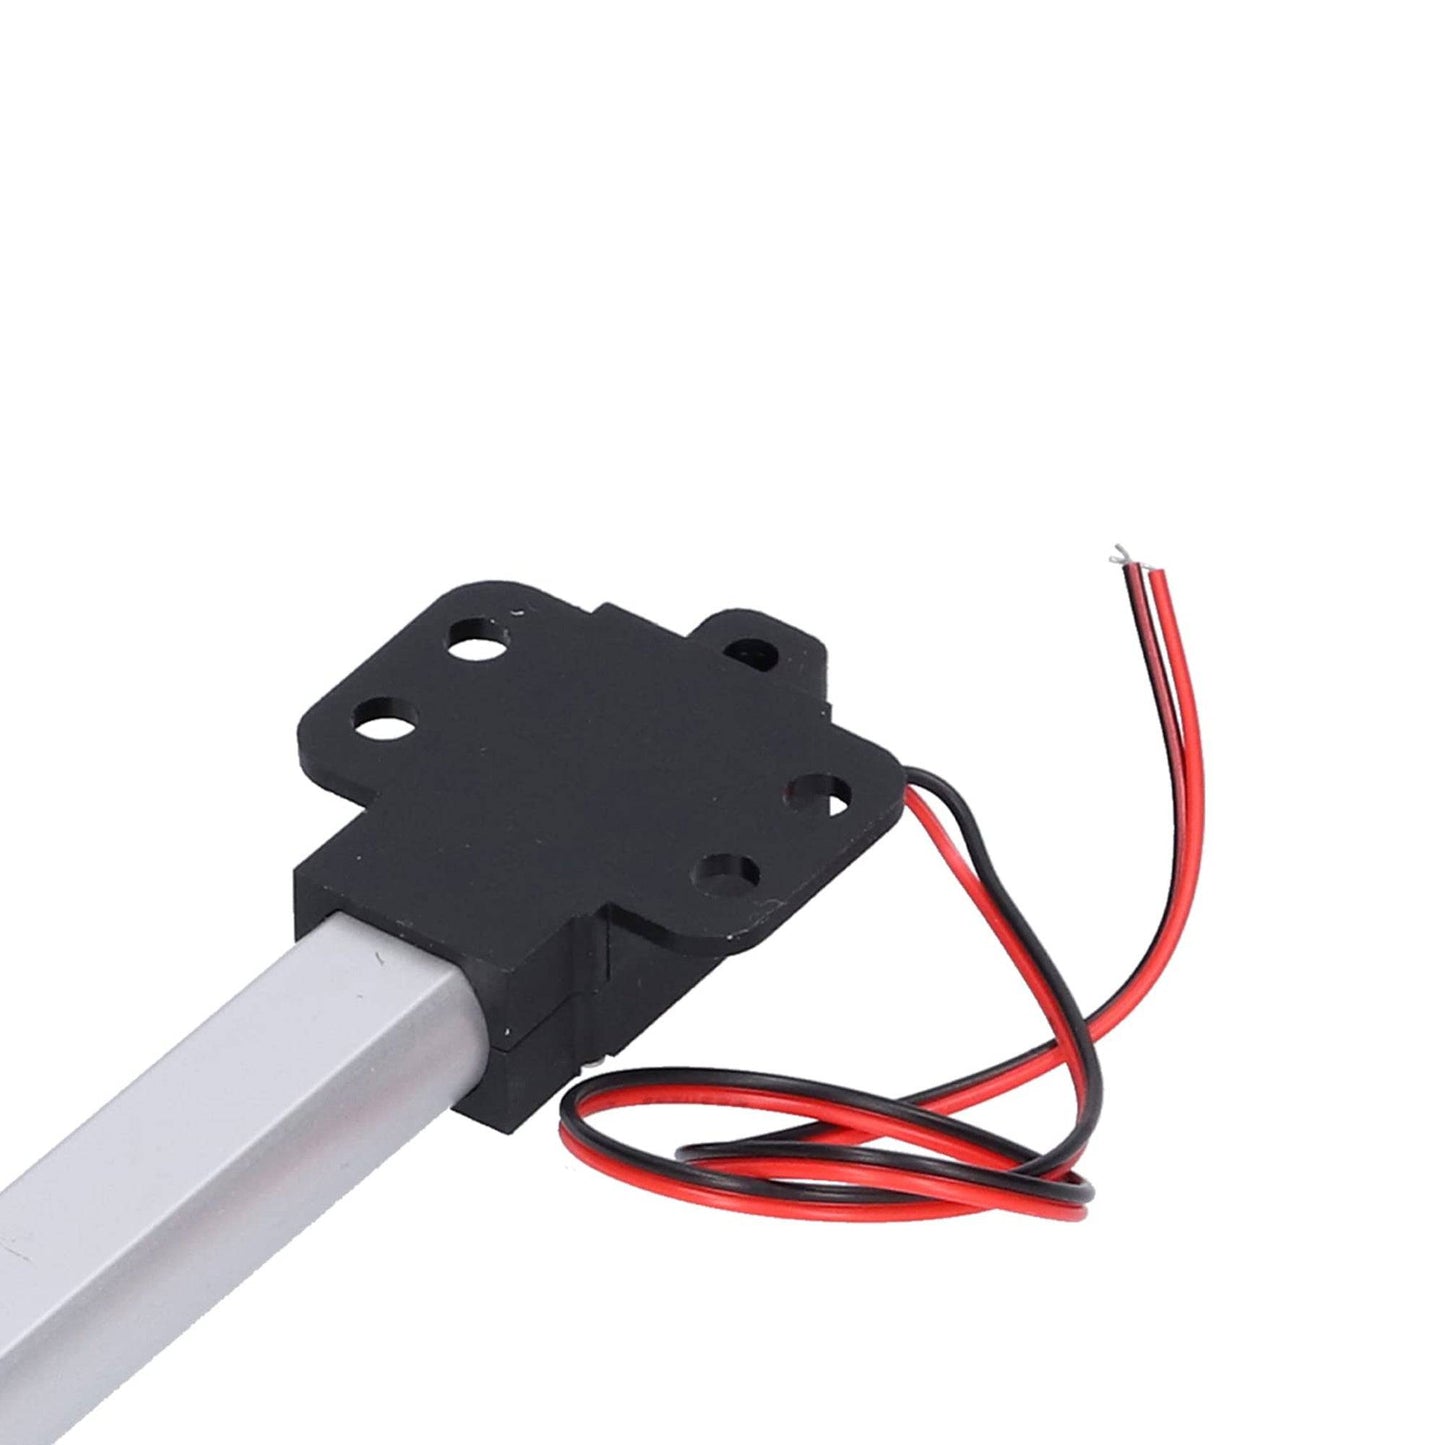 100mm-30mm/s Linear Motion Actuator 20N